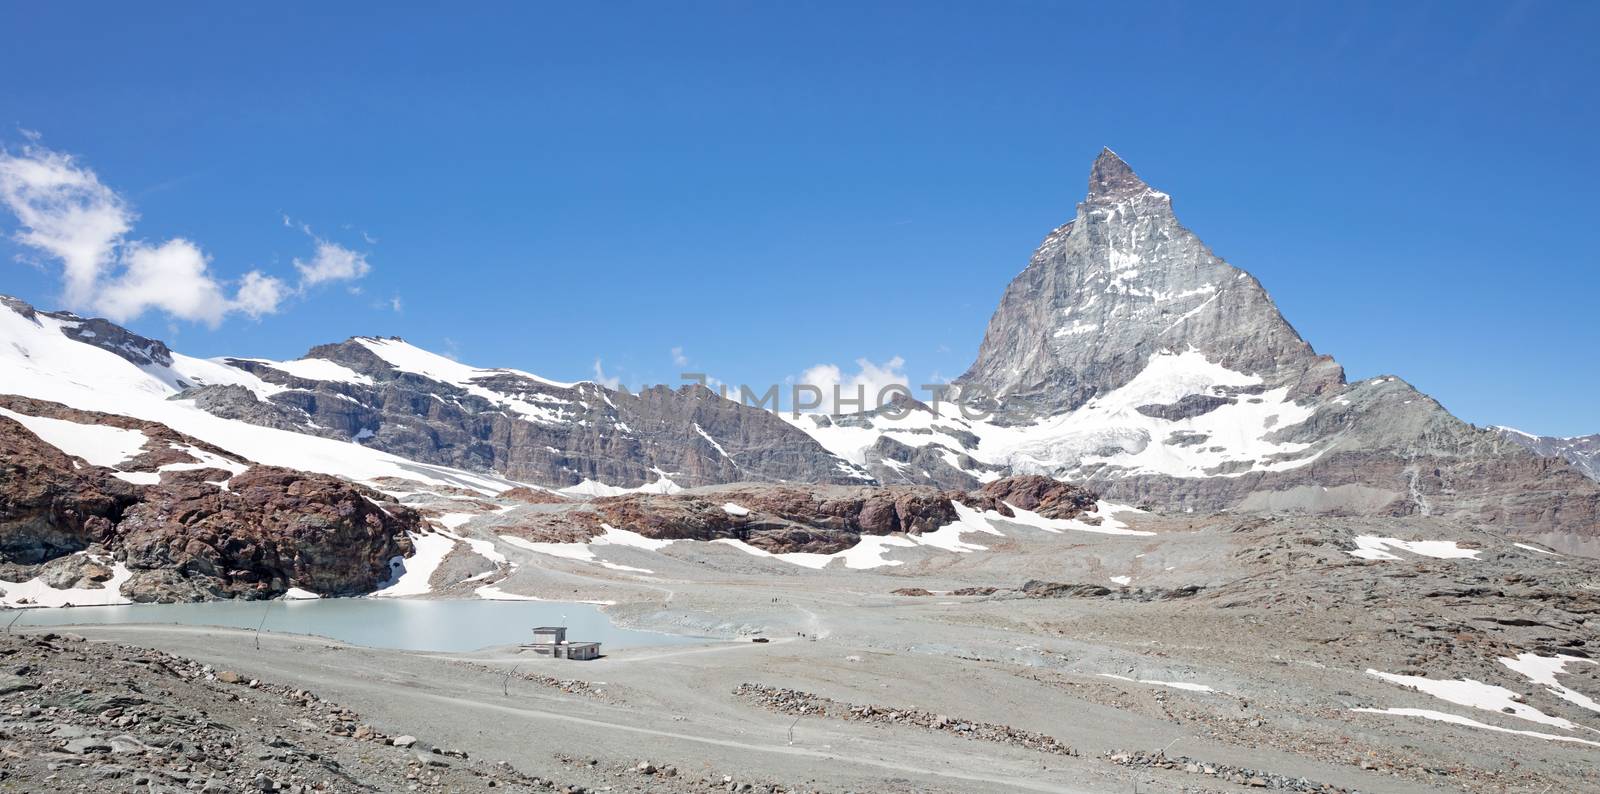 The Matterhorn, the iconic emblem of the Swiss Alps by michaklootwijk